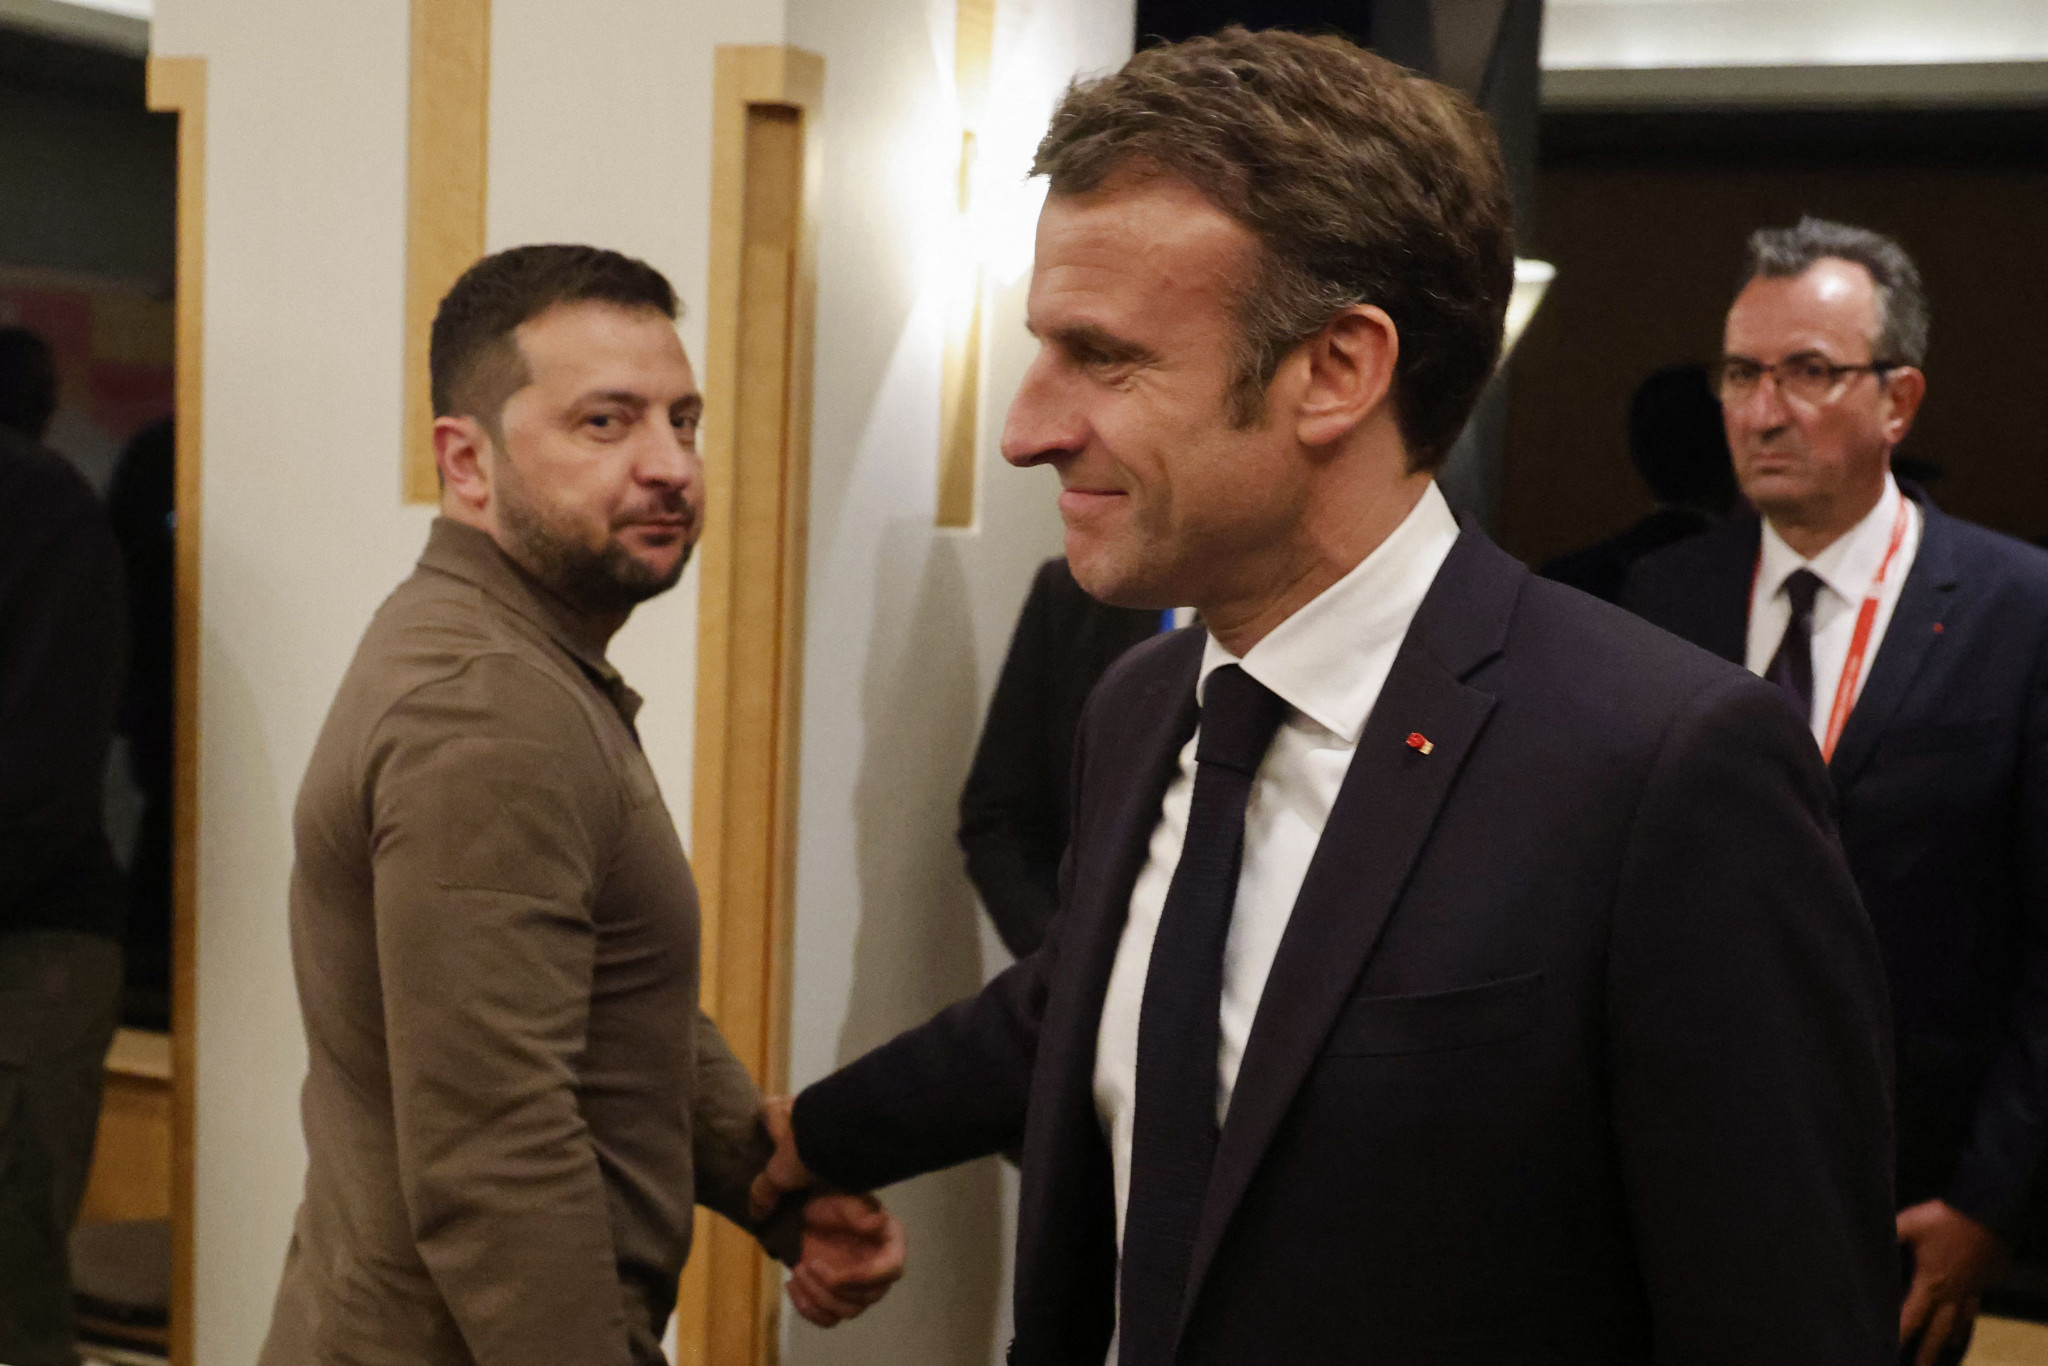 Volodymyr Zelenskyy, left, has urged Emmanuel Macron to block Russians and Belarusians from competing at Paris 2024 ©Getty Images